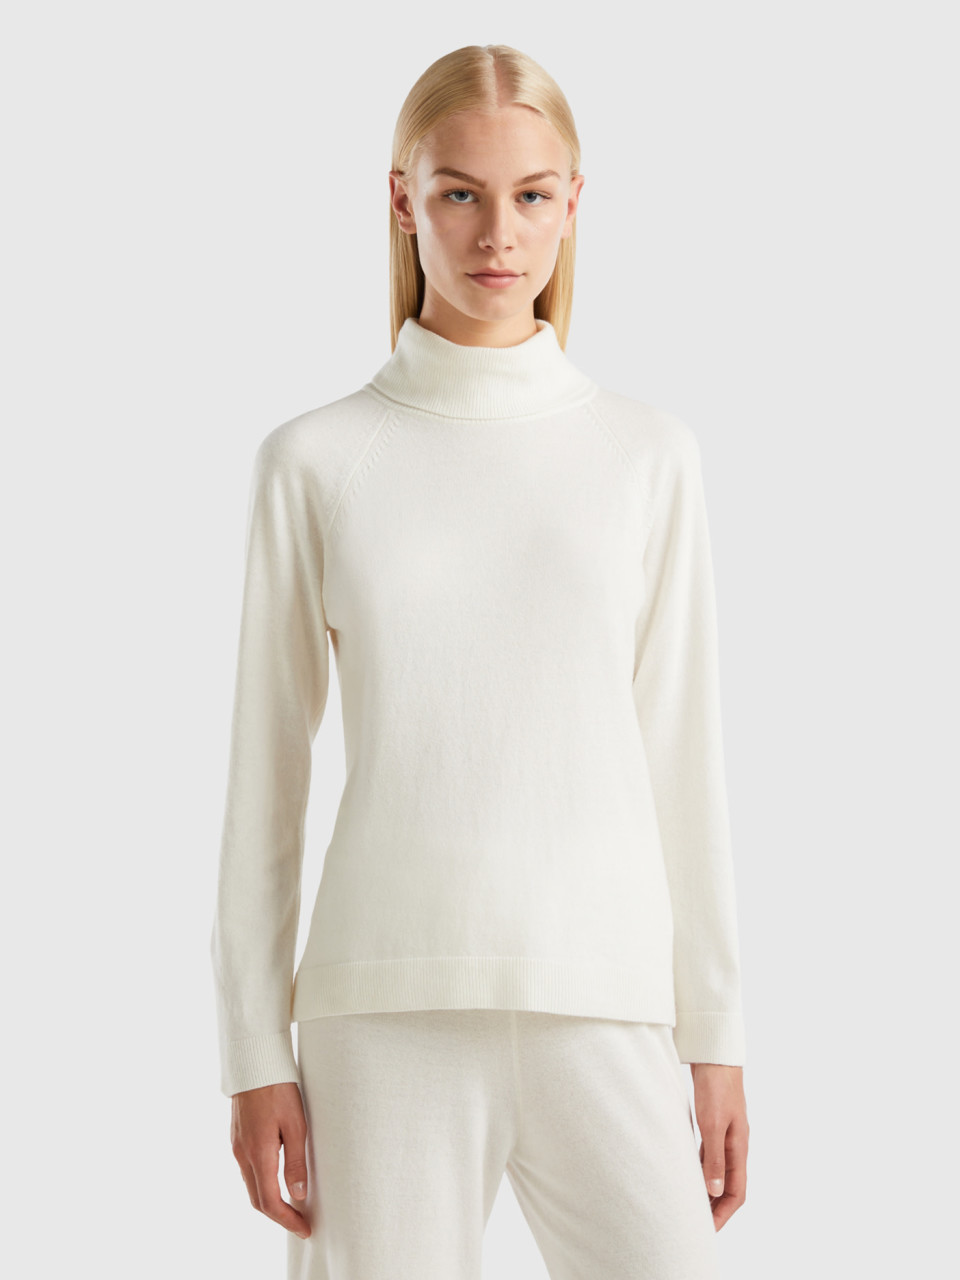 Benetton, White Turtleneck Sweater In Cashmere And Wool Blend, Creamy White, Women